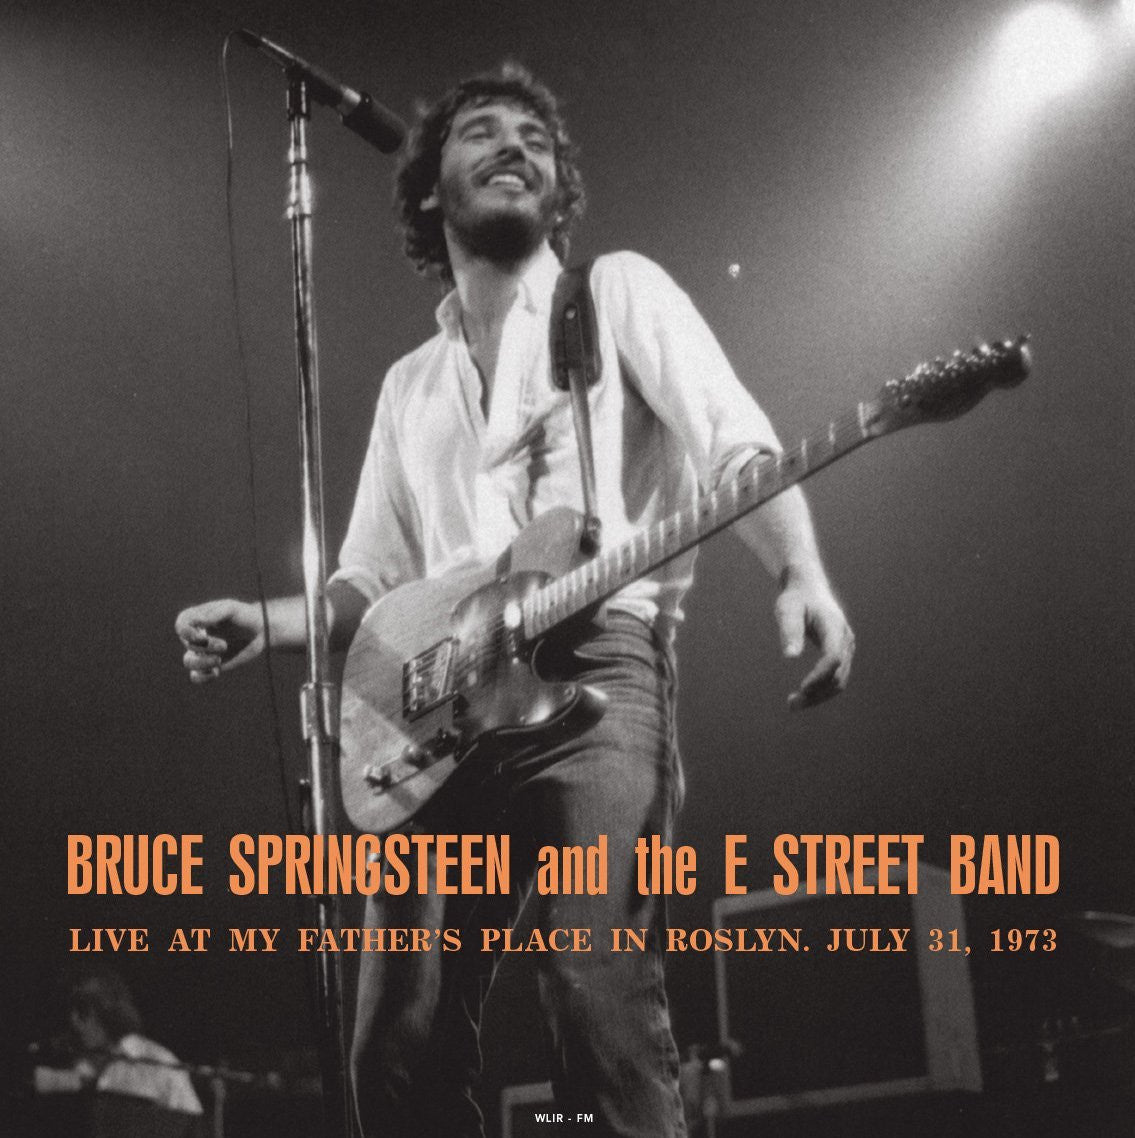 Springsteen, Bruce - Live At My Father's Place In Roslyn July 31 1973